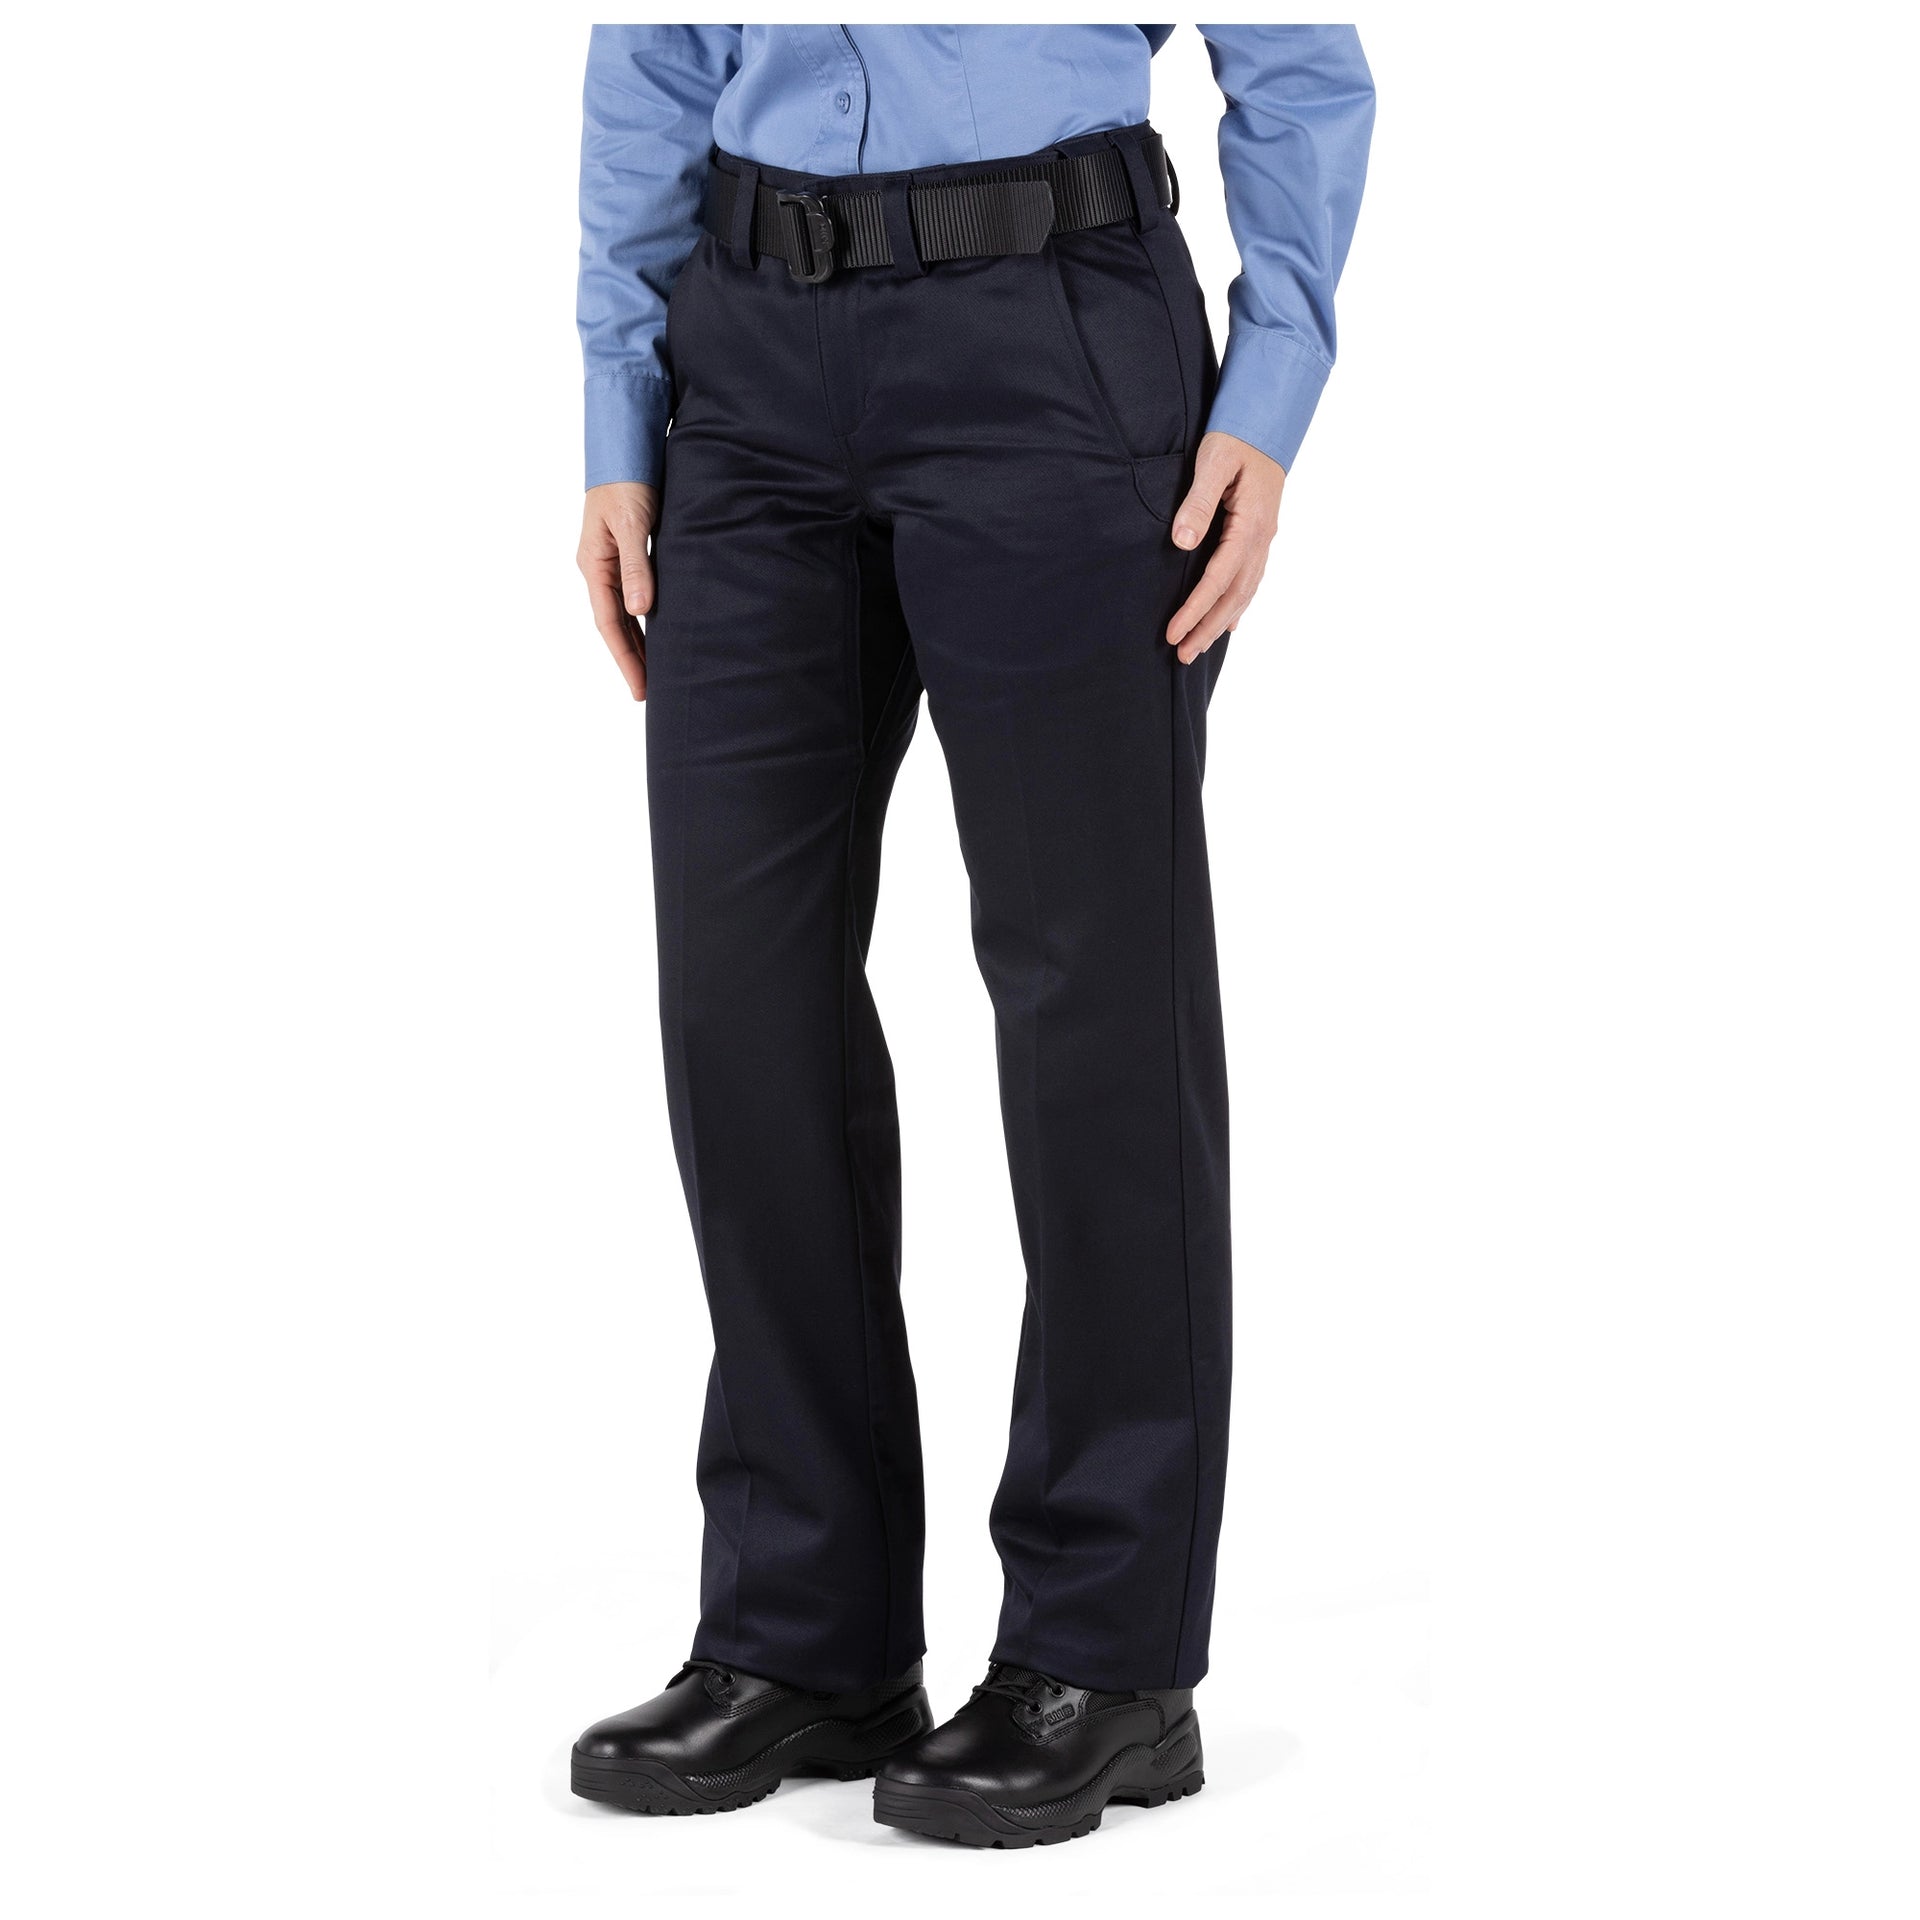 5.11 Tactical Women's Company Pant 2.0 (64435) | The Fire Center | Fuego Fire Center | FIREFIGHTER GEAR | Under pressure, close to the heat, the Company Pant 2.0 helps you stay focused and ready. Designed with proven, station-ready features, this pant is certified to NFPA 1975 (2019 edition). It’s constructed with a Tough Cotton™